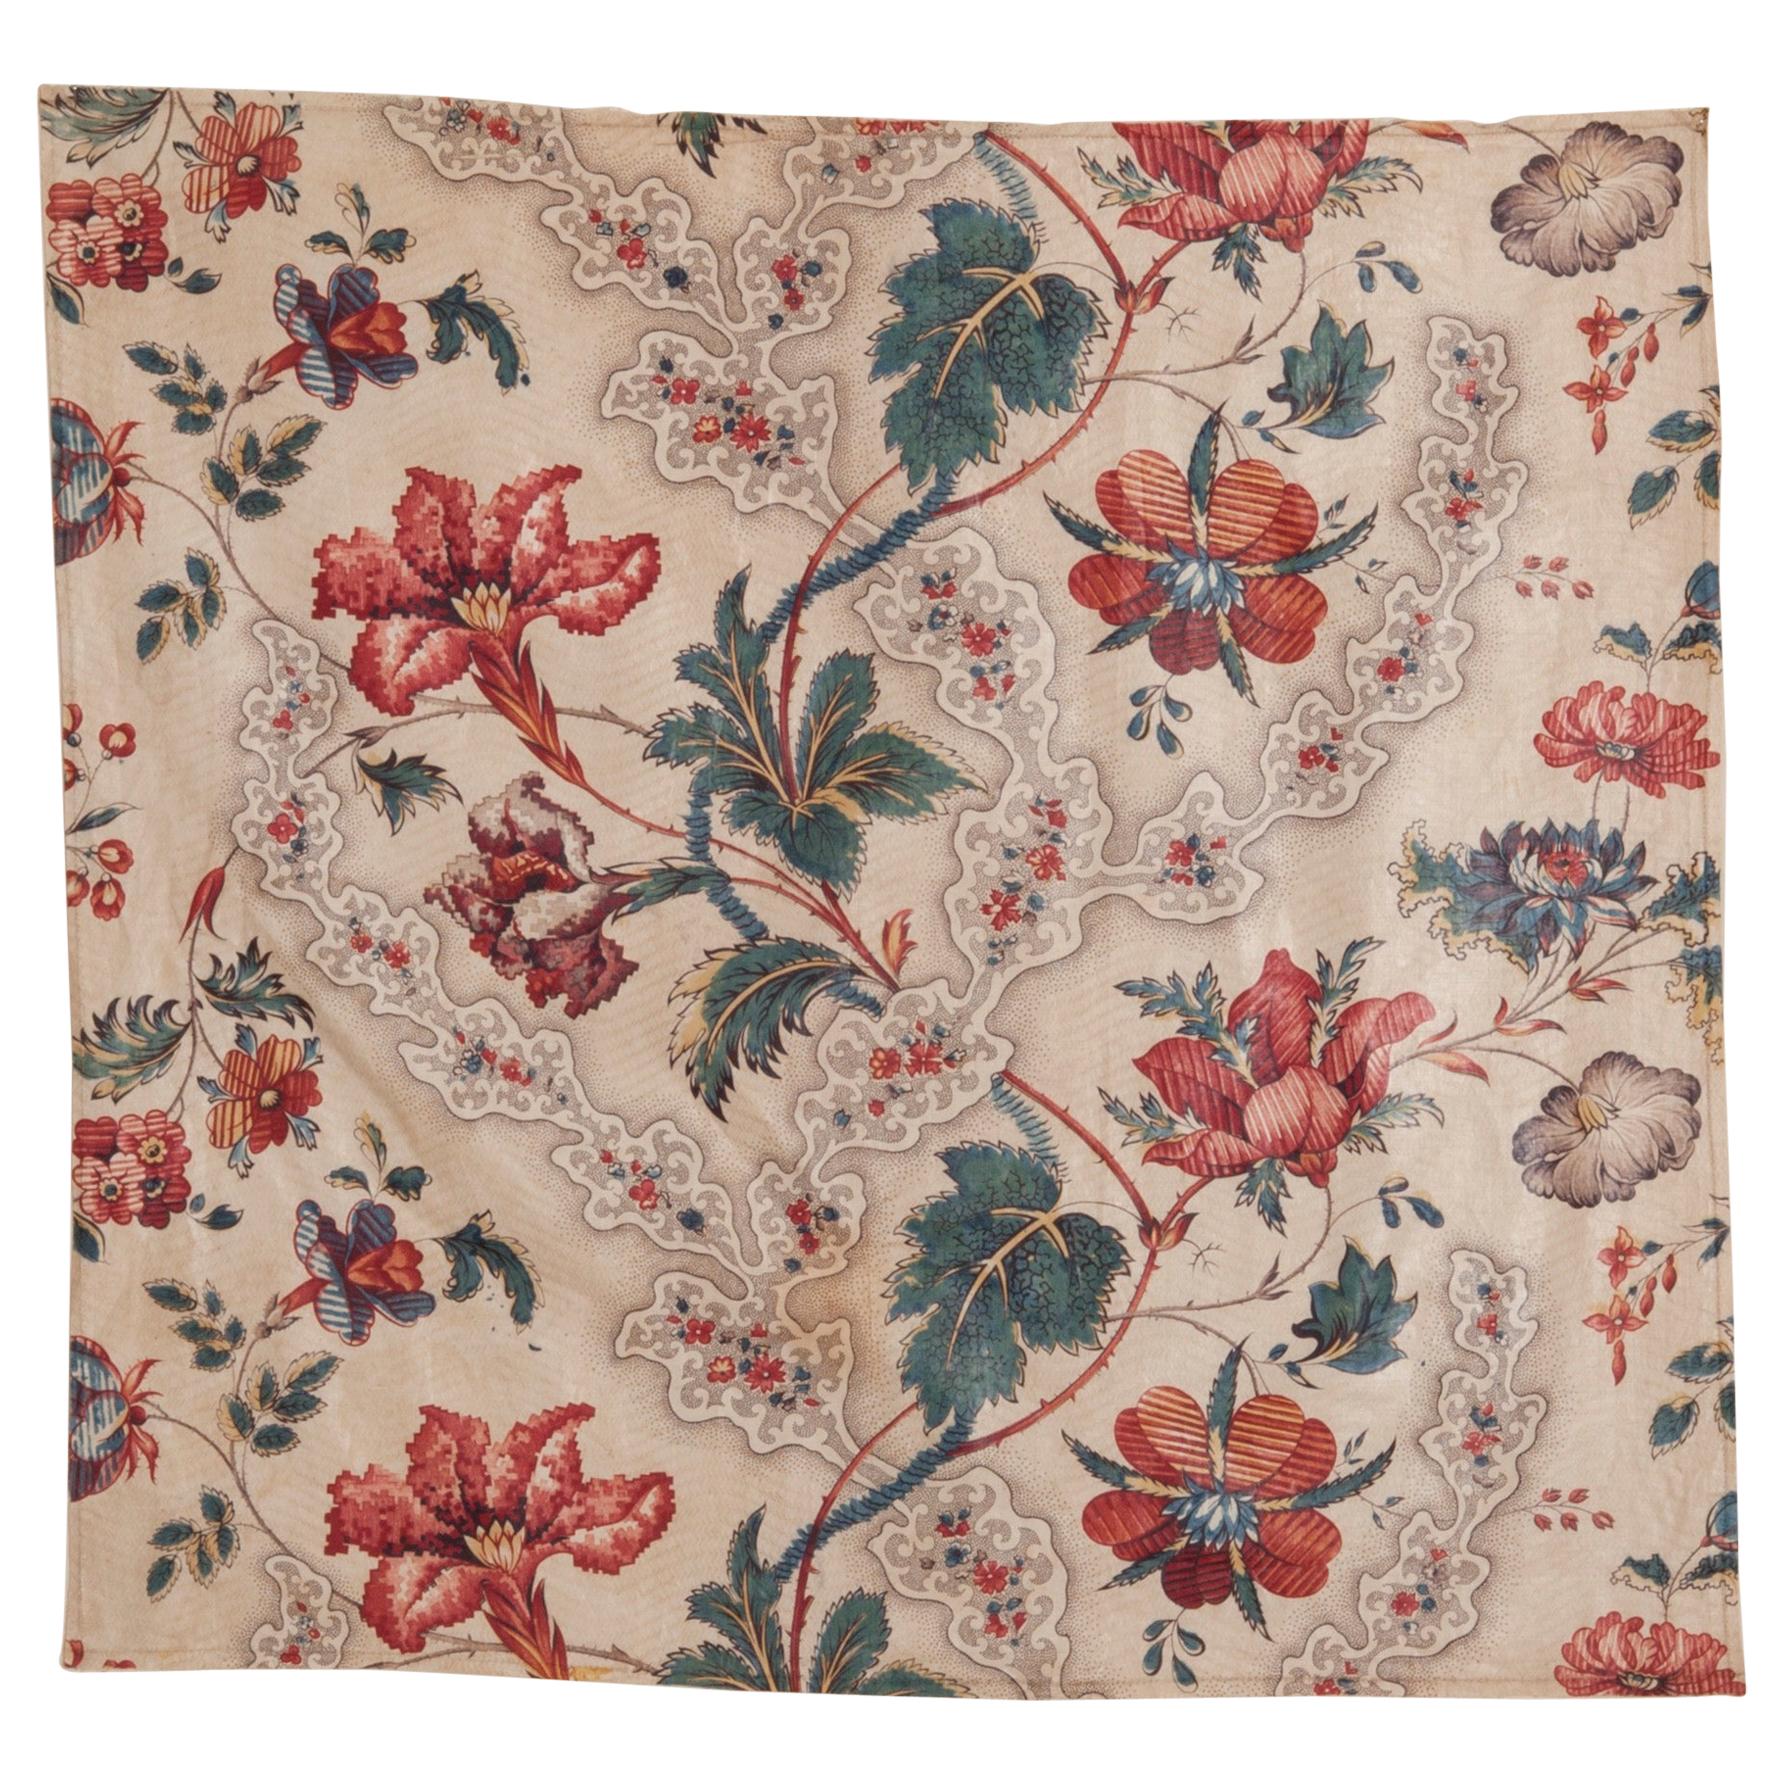 Early 19th Century British Printed Chintz Cotton Textile For Sale